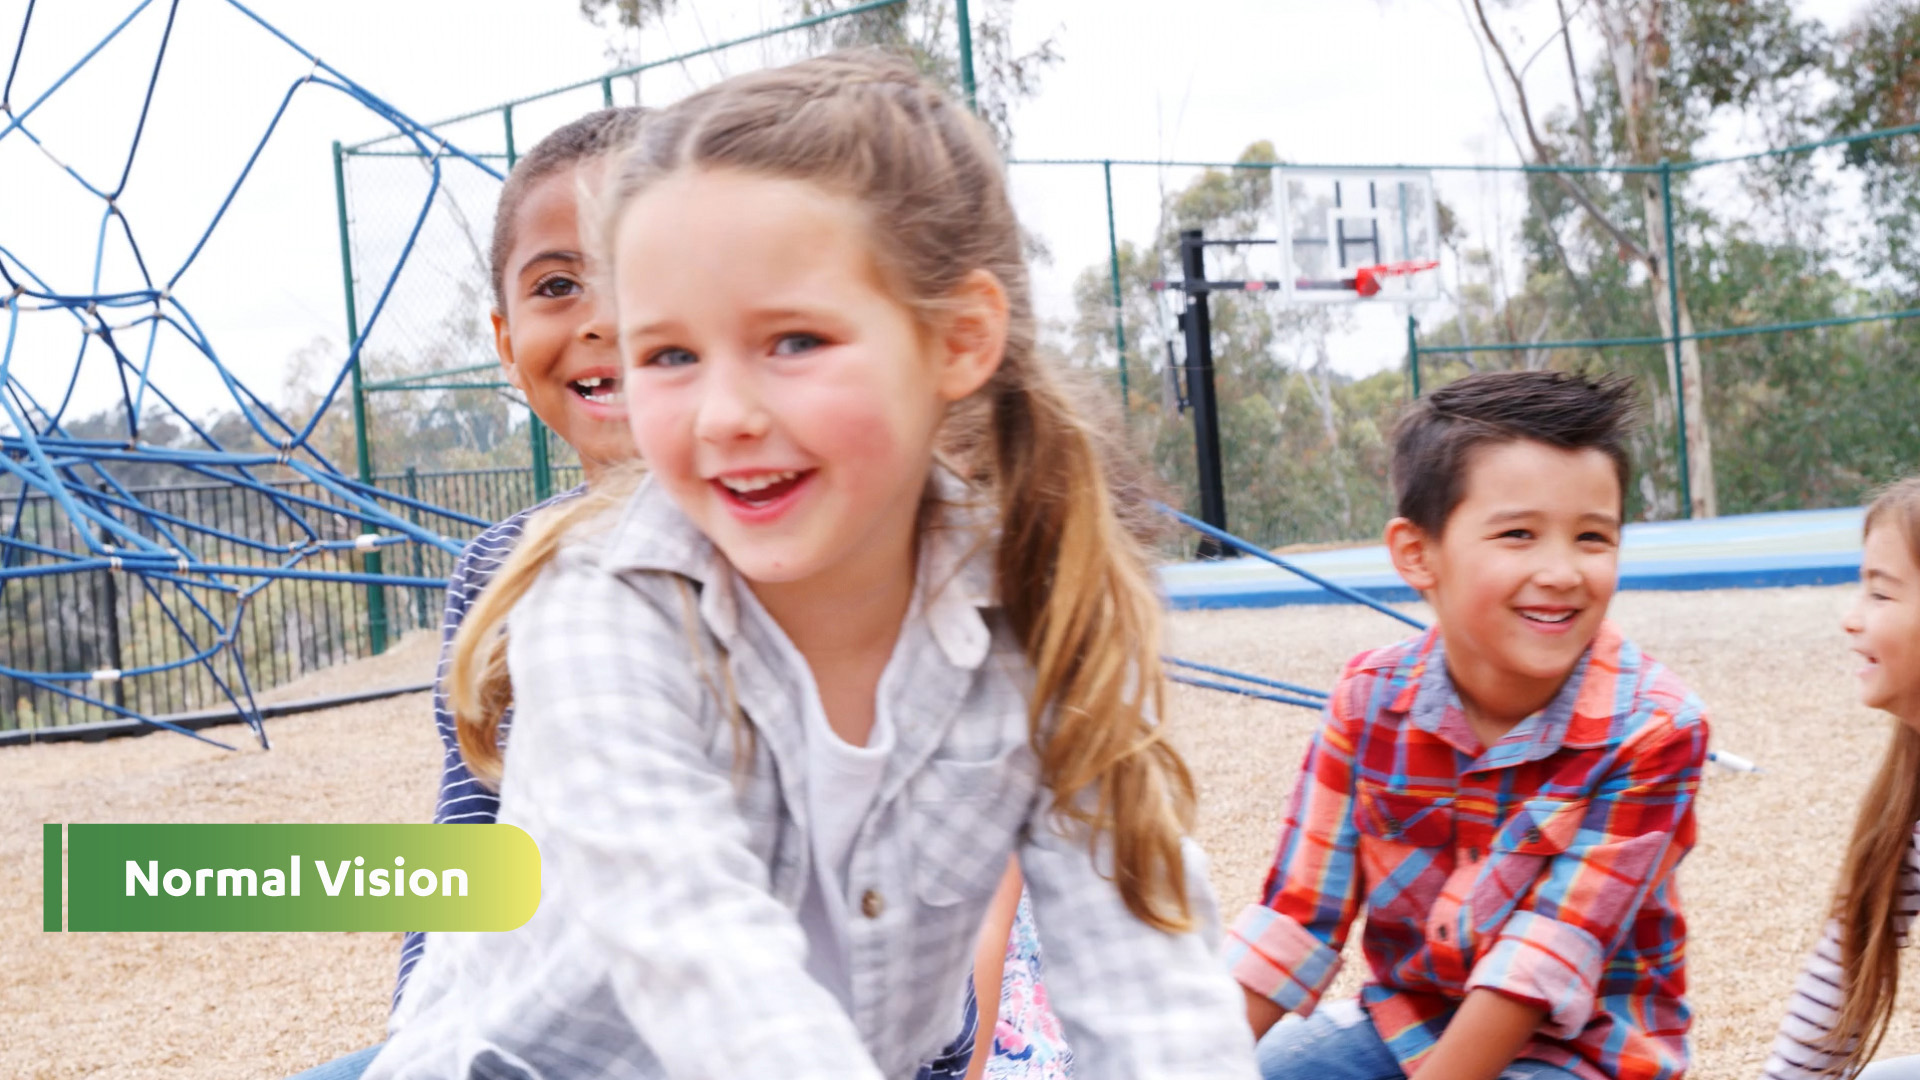 Normal Vision: Photo of young girl in a gray checkered shirt smiling with other children on a playground.